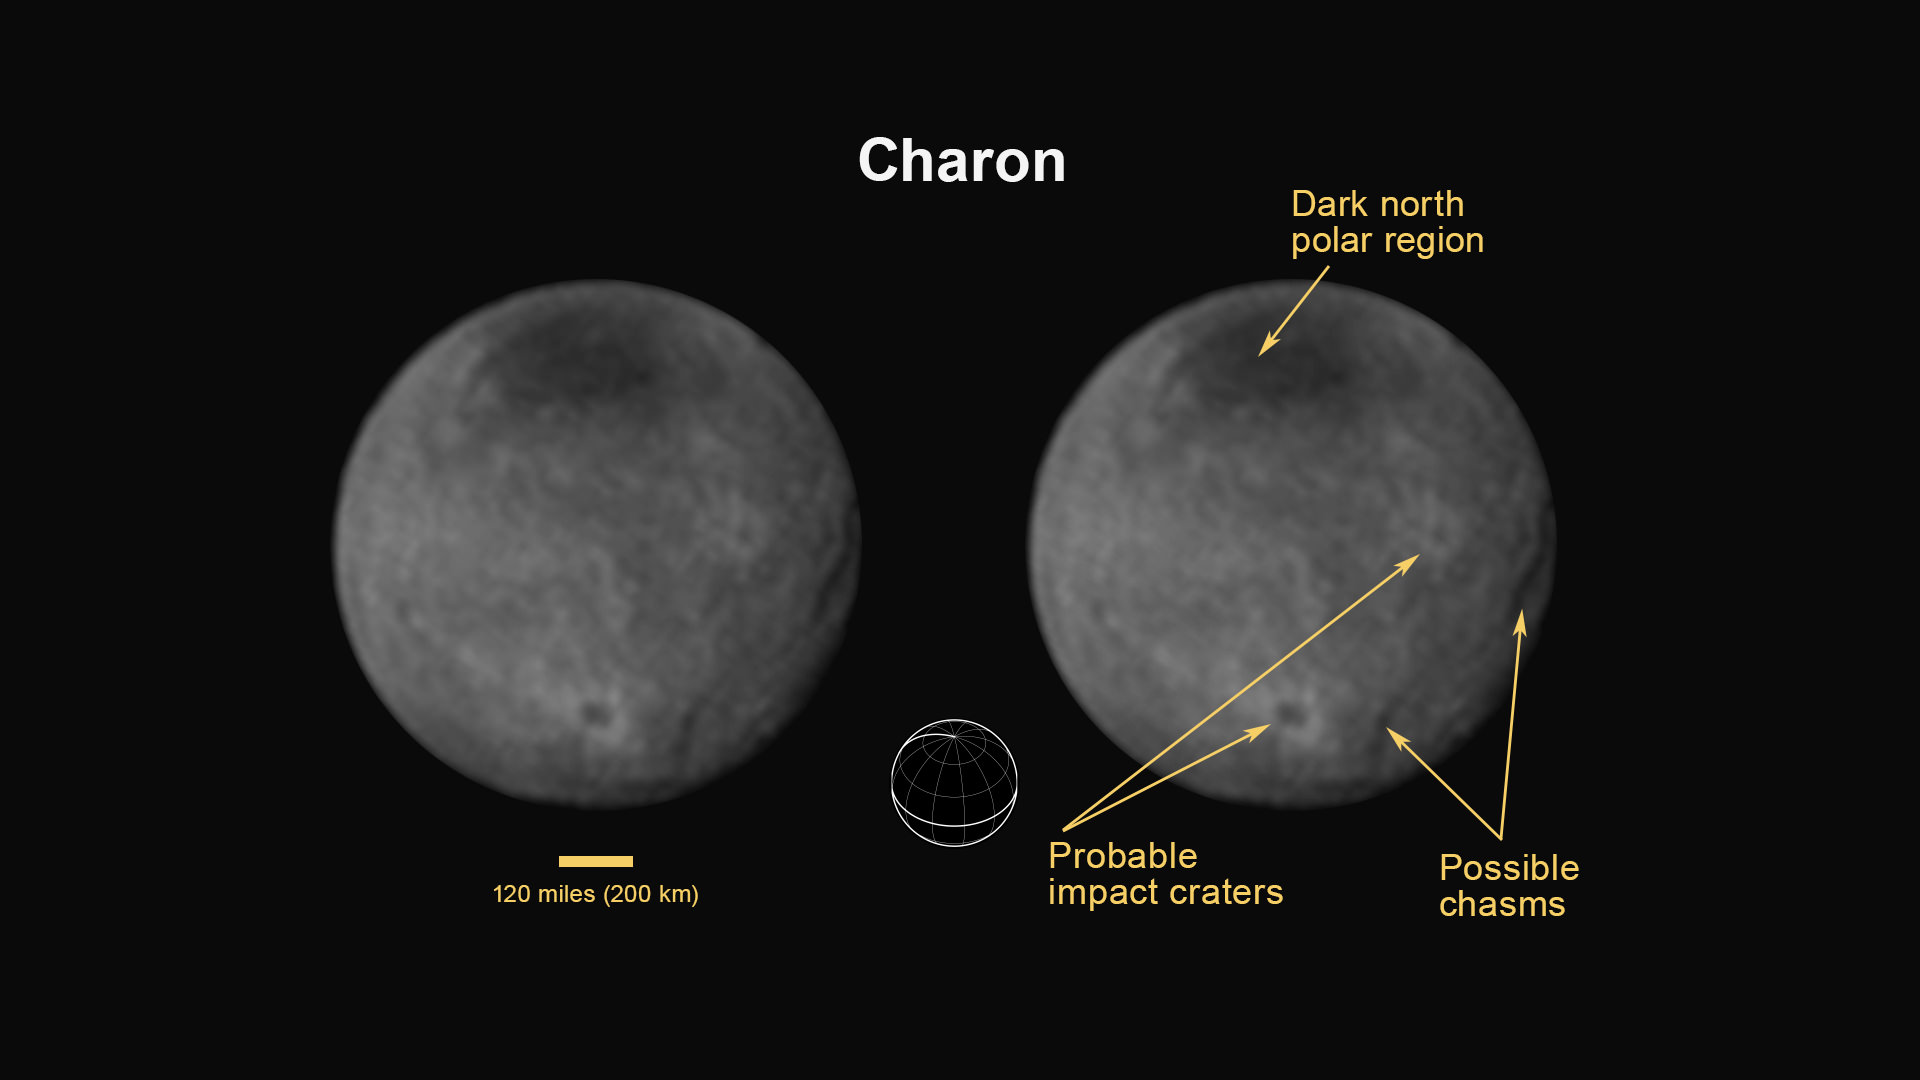 Chasms, craters, and a dark north polar region are revealed in this image of Pluto’s largest moon Charon taken by New Horizons on July 11, 2015. The annotated version includes a diagram showing Charon’s north pole, equator, and central meridian, with the features highlighted.  Credits: NASA/JHUAPL/SWRI 